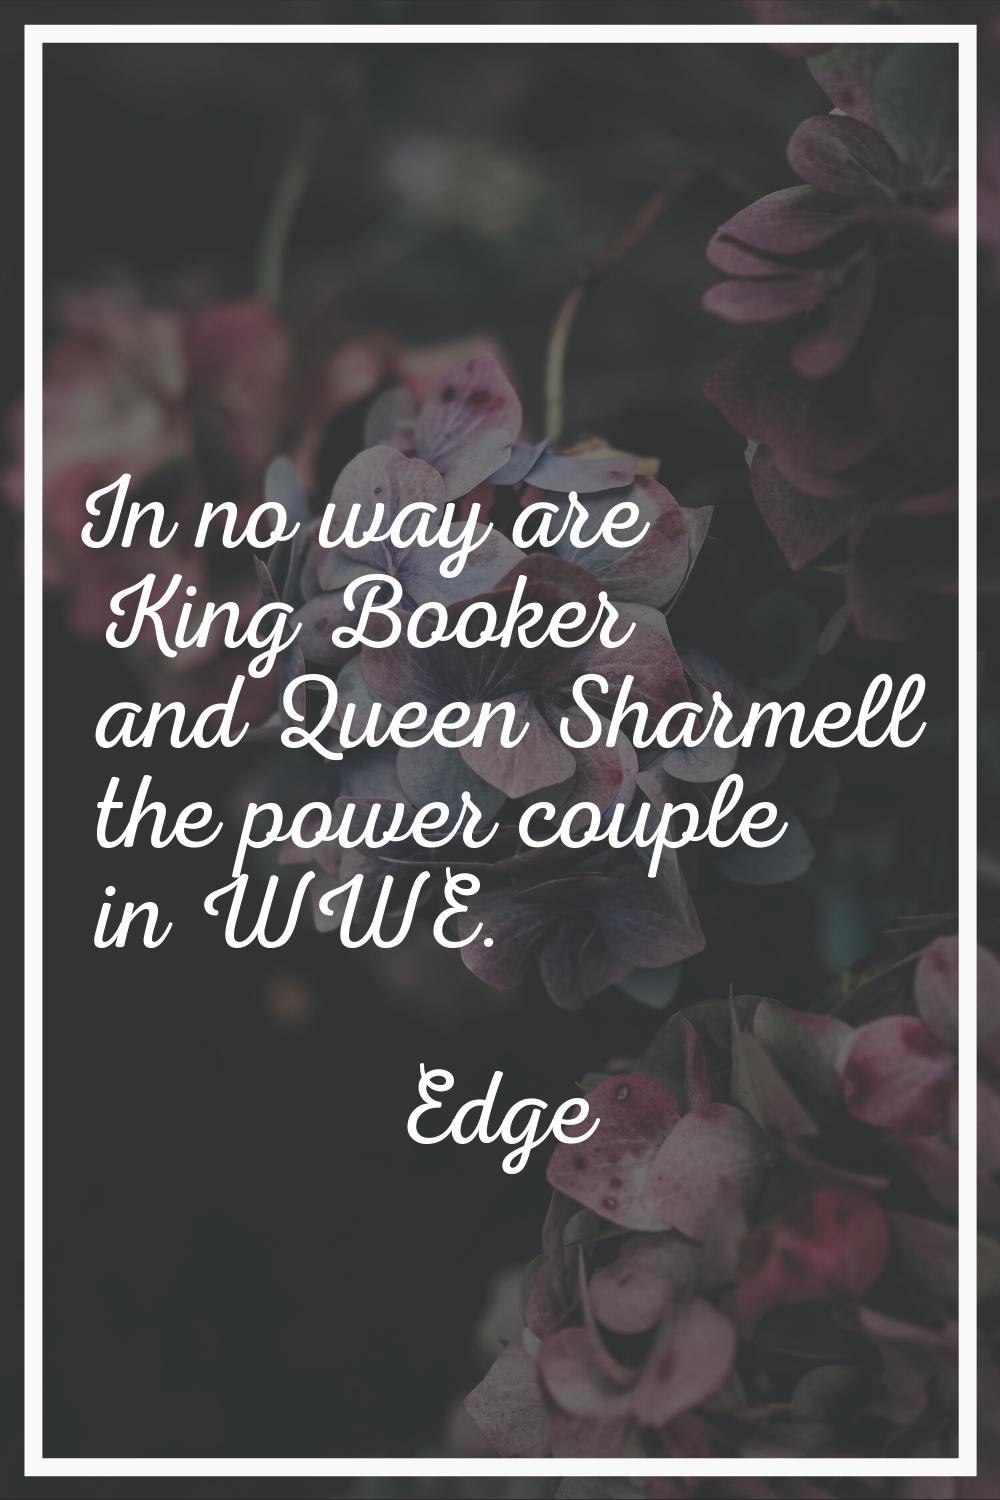 In no way are King Booker and Queen Sharmell the power couple in WWE.